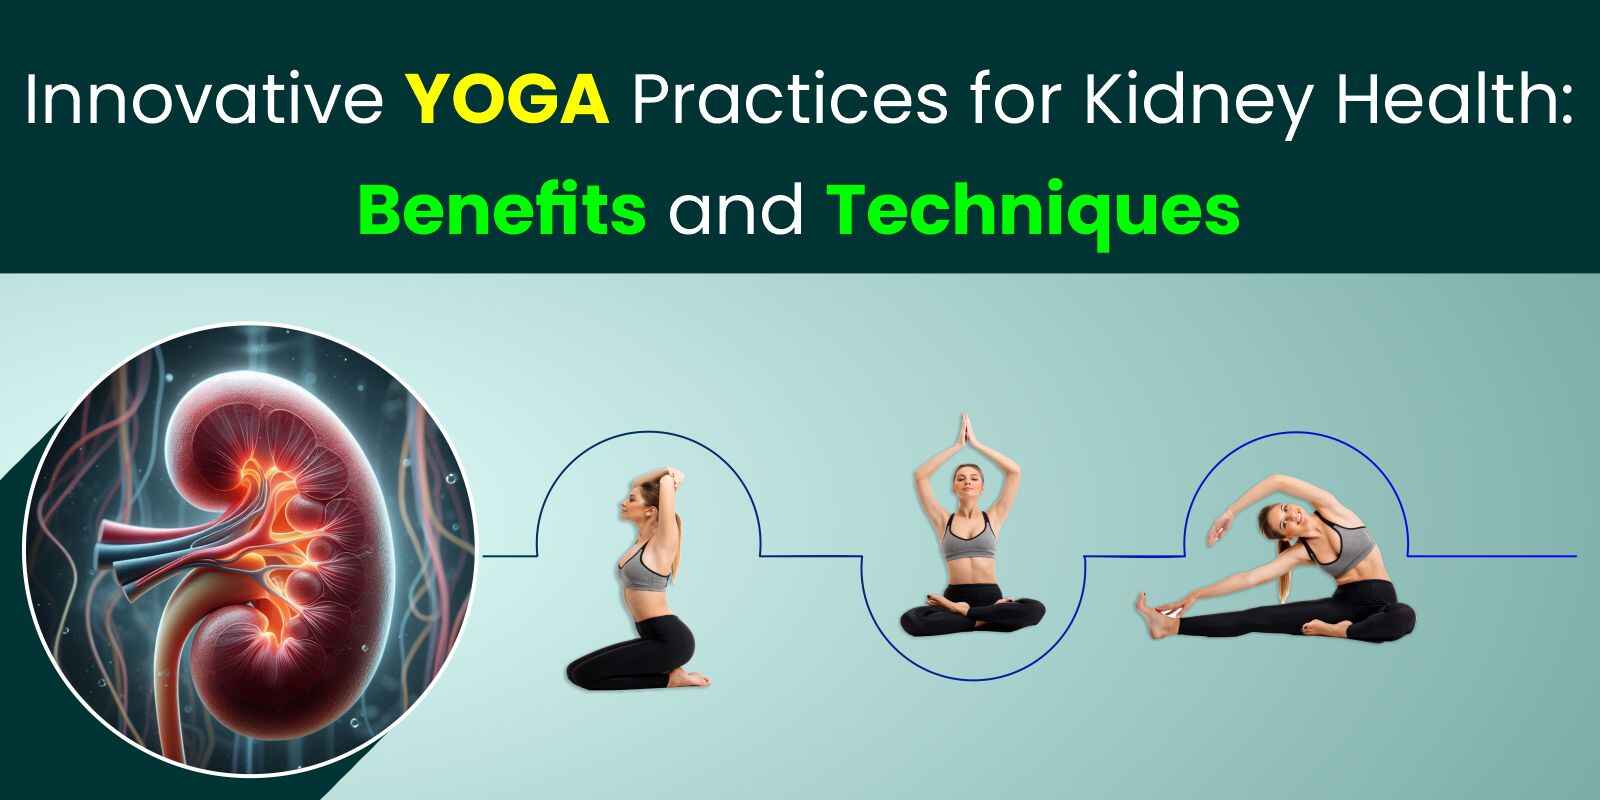 Innovative Yoga Practices for Kidney Health: Benefits and Techniques